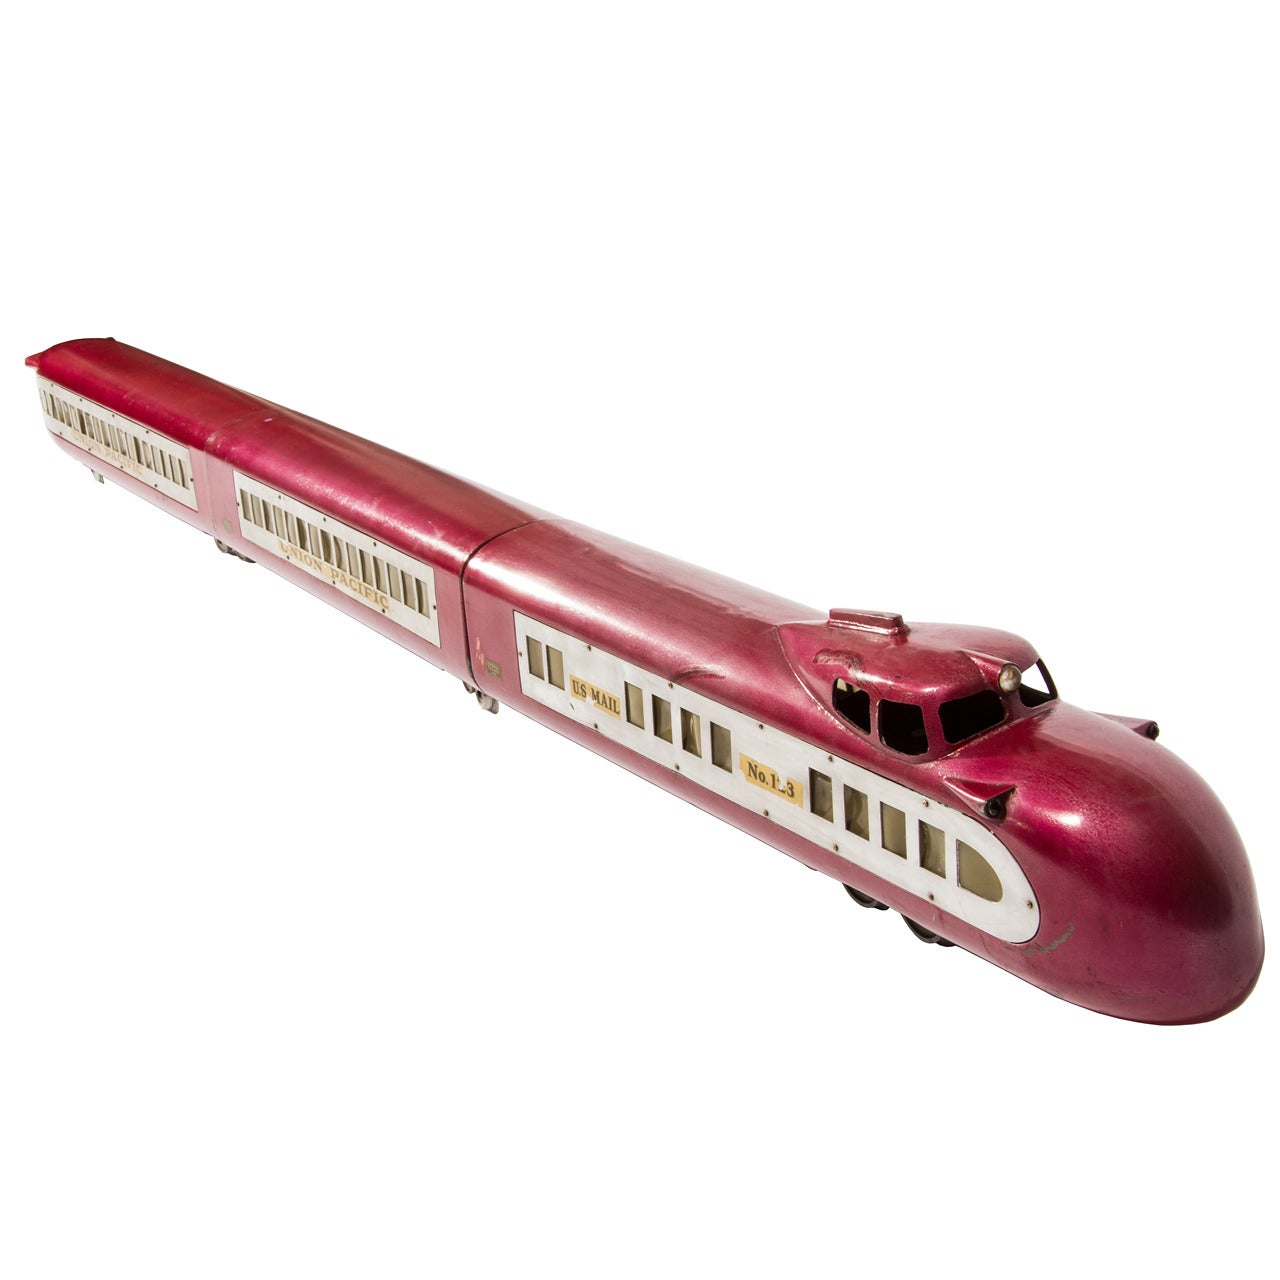 Art Deco Streamlined Union Pacific Model Toy Electric Train